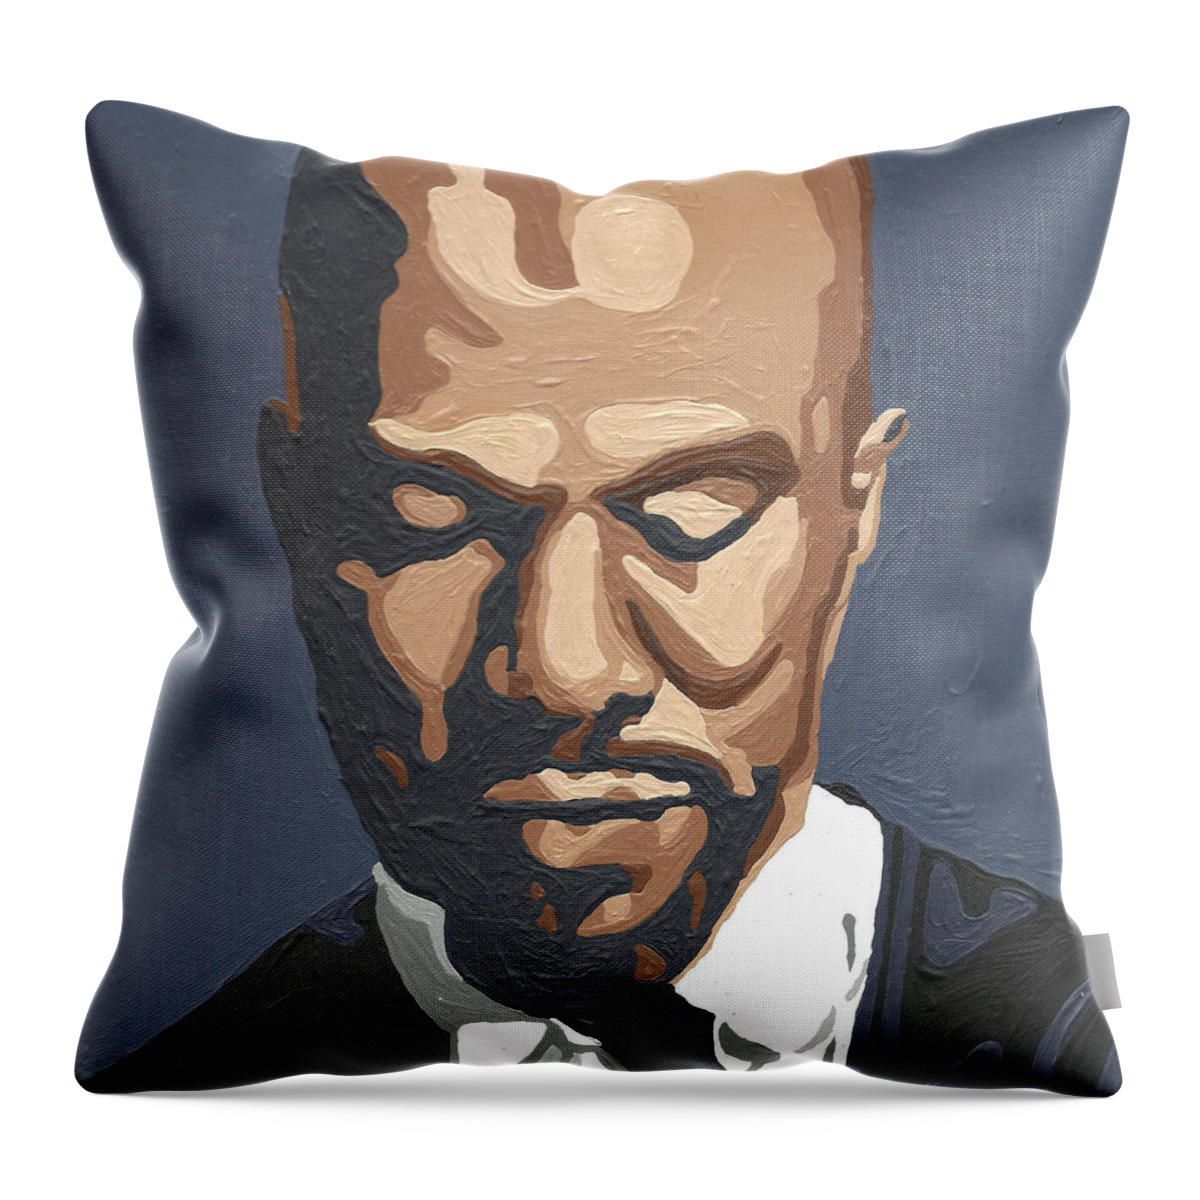 Instaprints Throw Pillow featuring the photograph Common by Rachel Natalie Rawlins